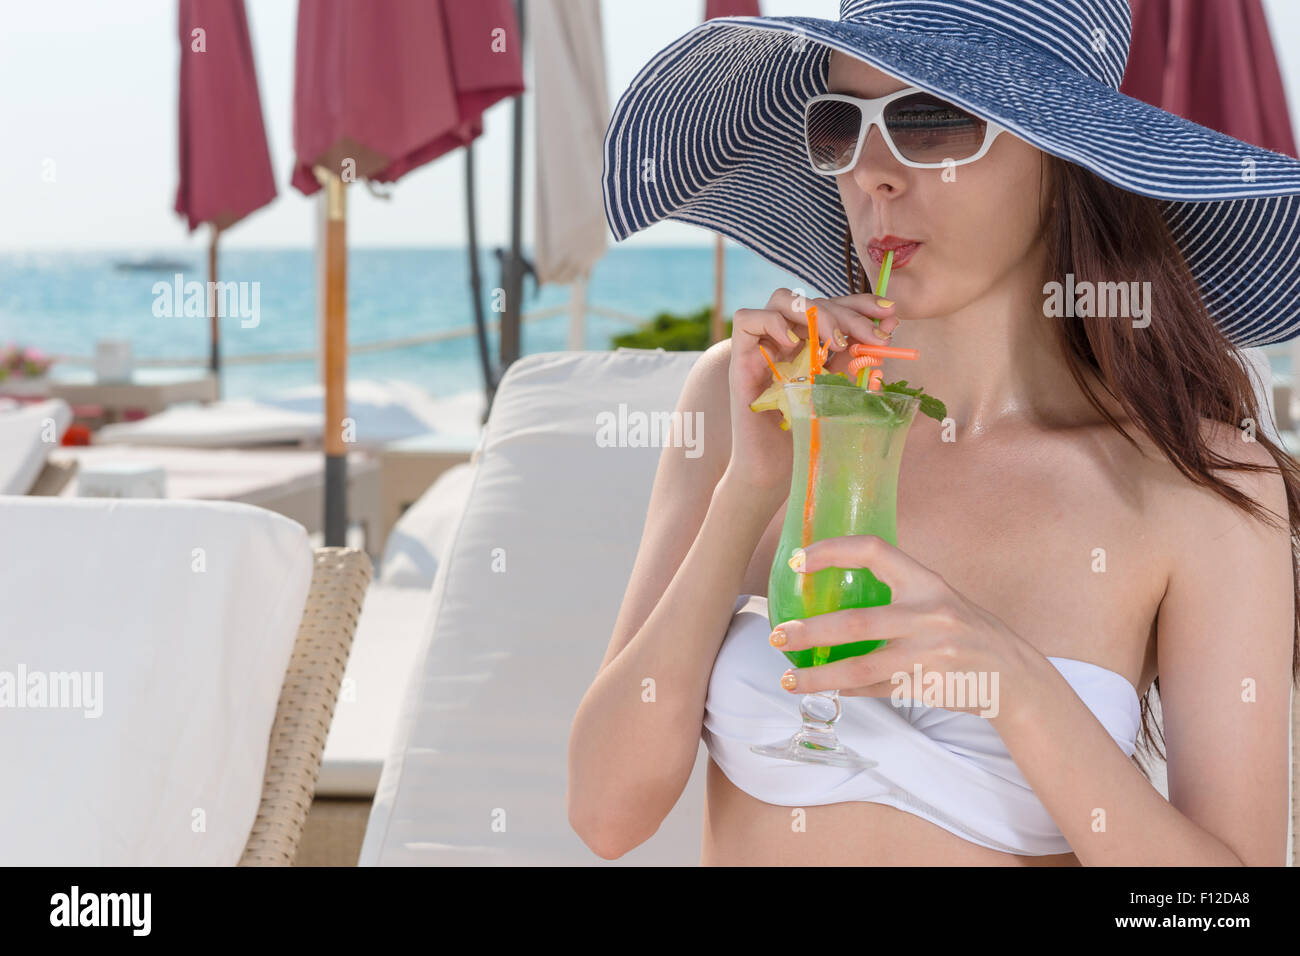 Elegant young woman in a straw sunhat and sunglasses sipping a tropical cocktail as she relaxes on a recliner chair at a seaside resort. Stock Photo